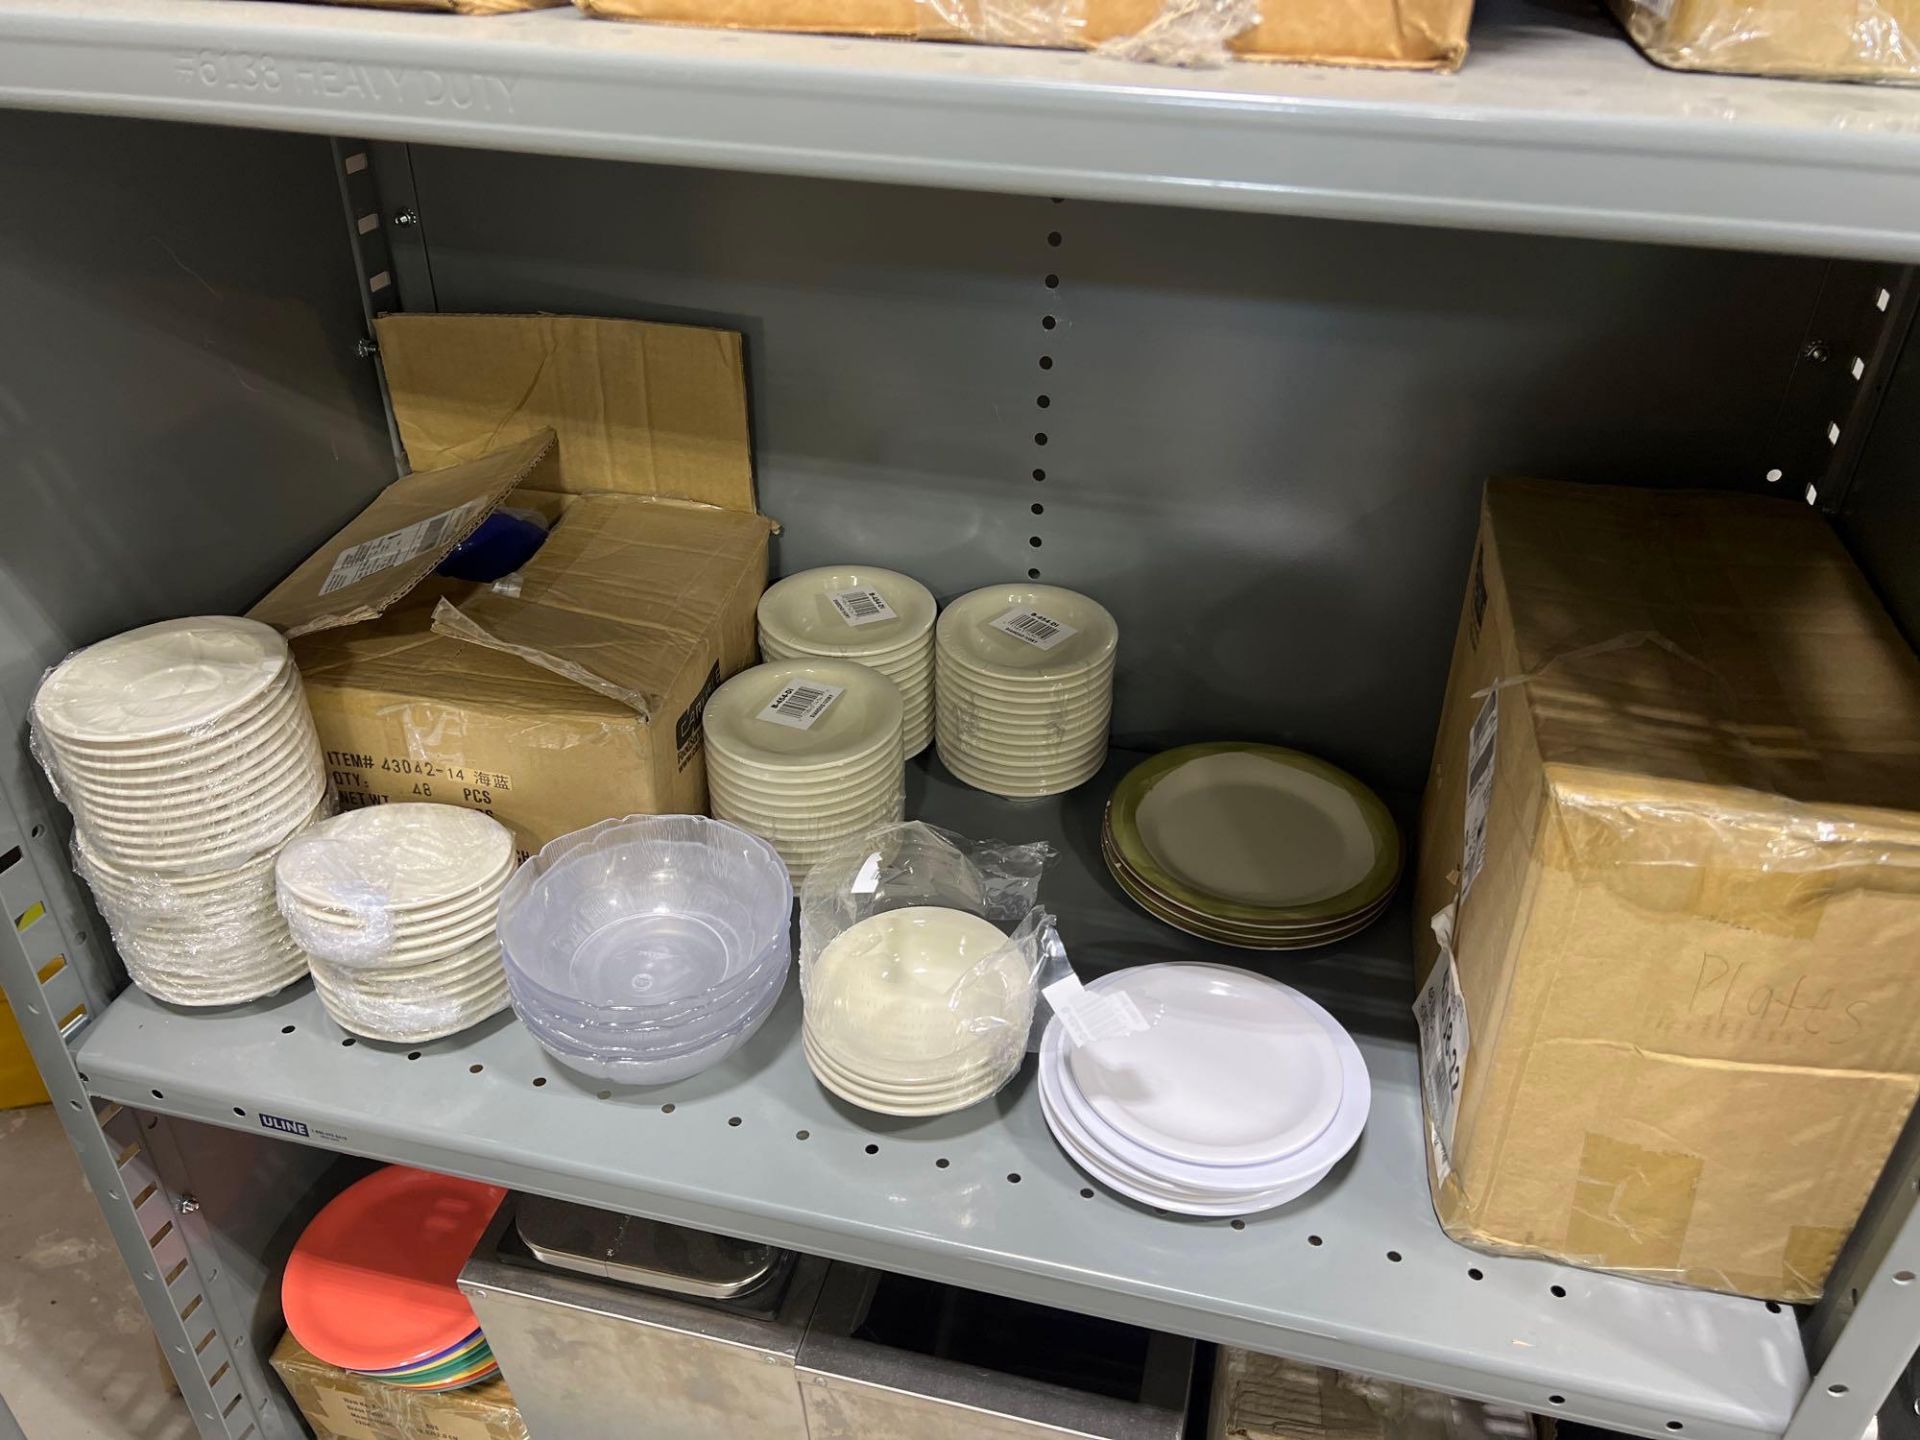 4 Shelves of Assorted Dishes, glass mugs, and Other Kitchen Items - Image 4 of 13